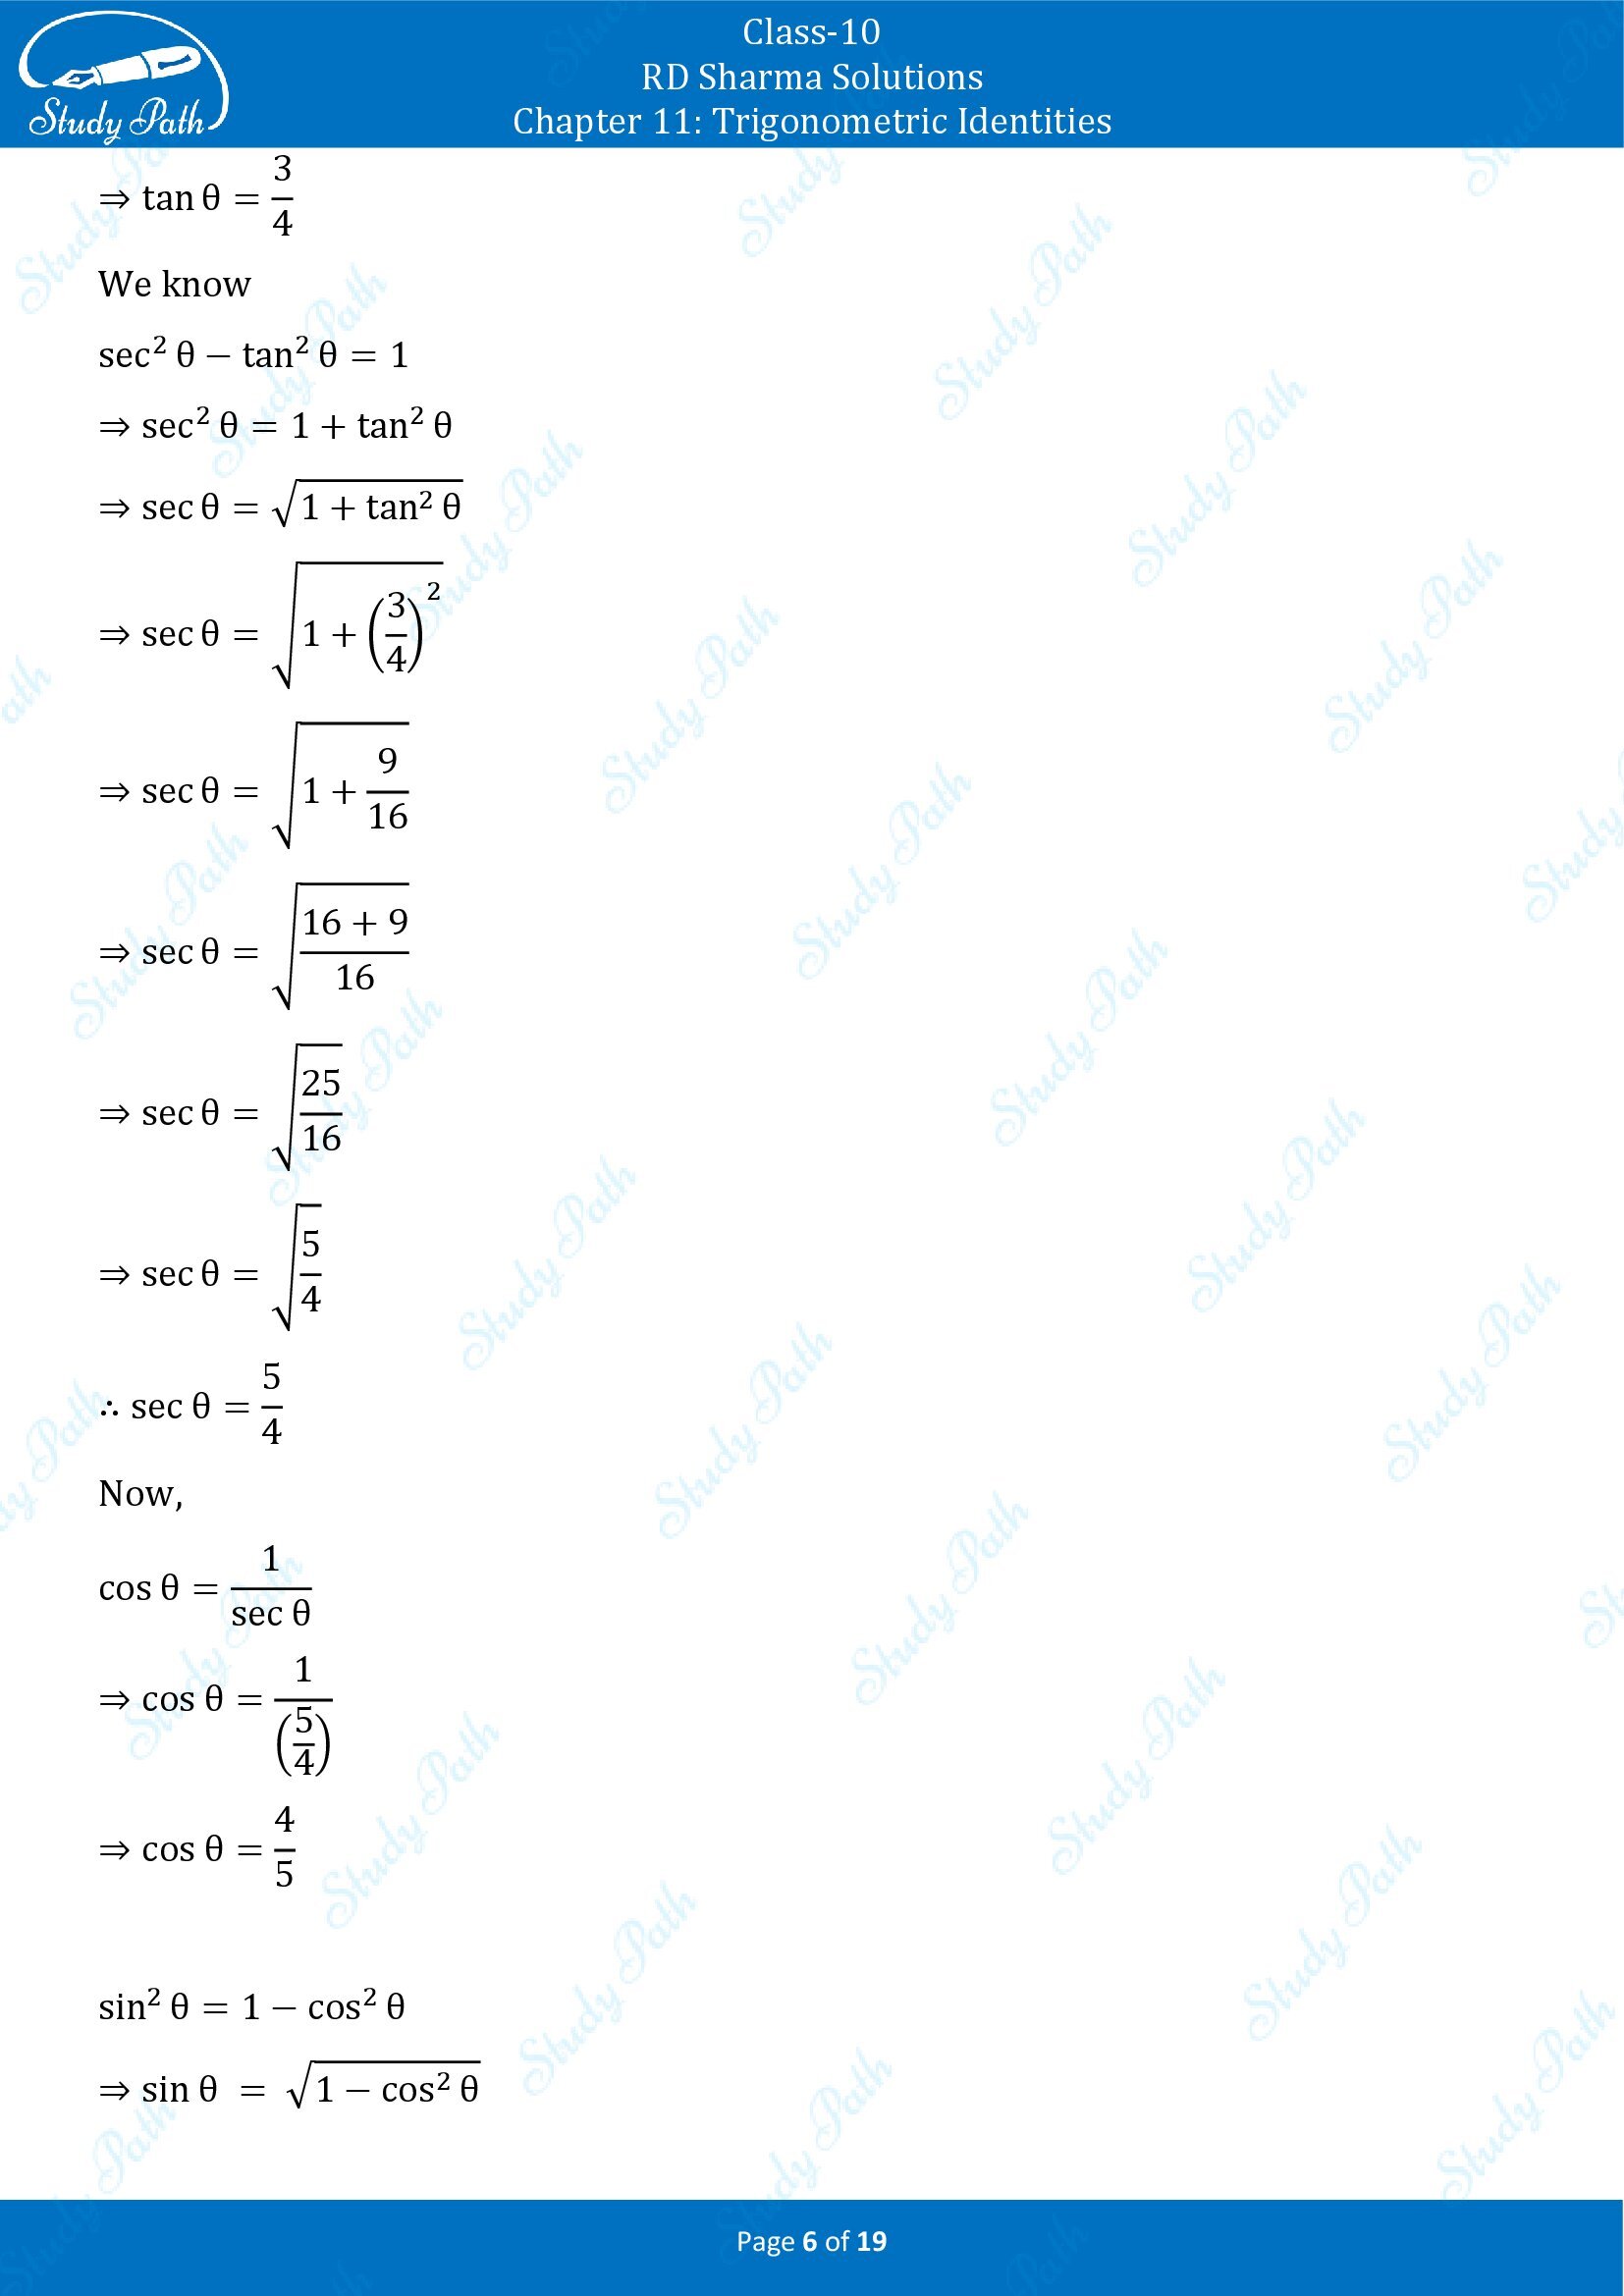 RD Sharma Solutions Class 10 Chapter 11 Trigonometric Identities Exercise 11.2 00006